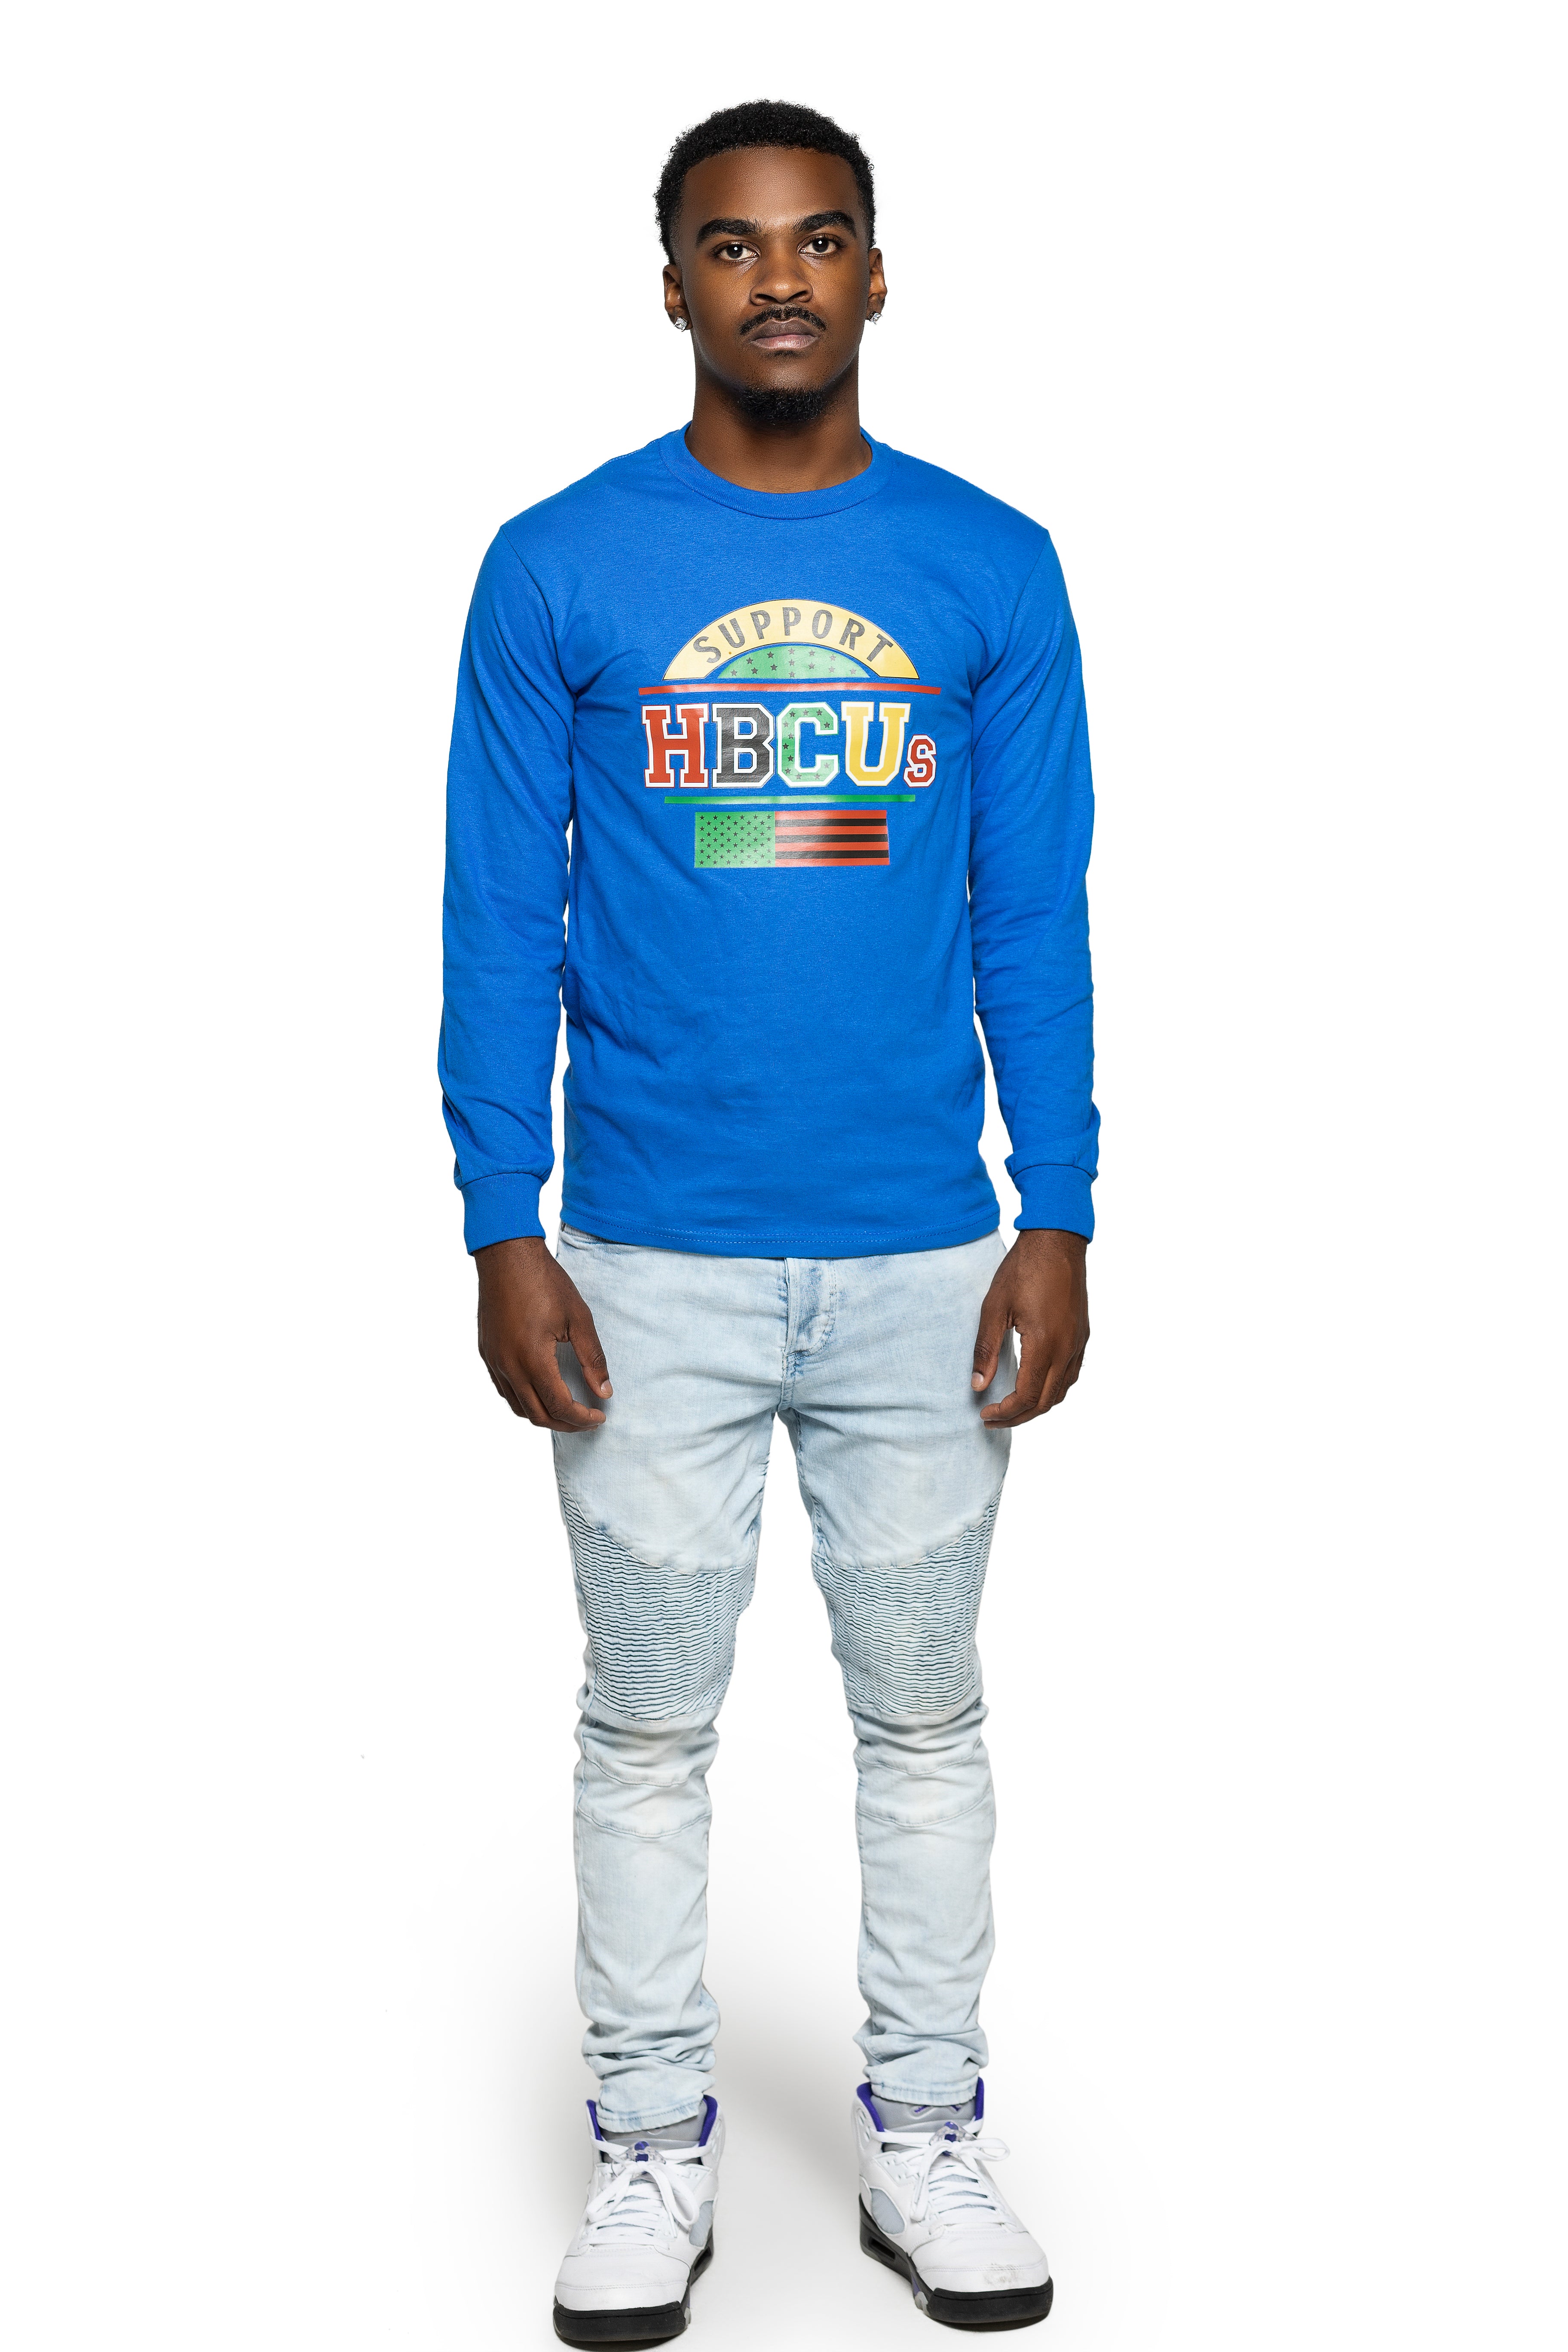 ROYAL BLUE SUPPORT HBCUs LONG SLEEVES TEE